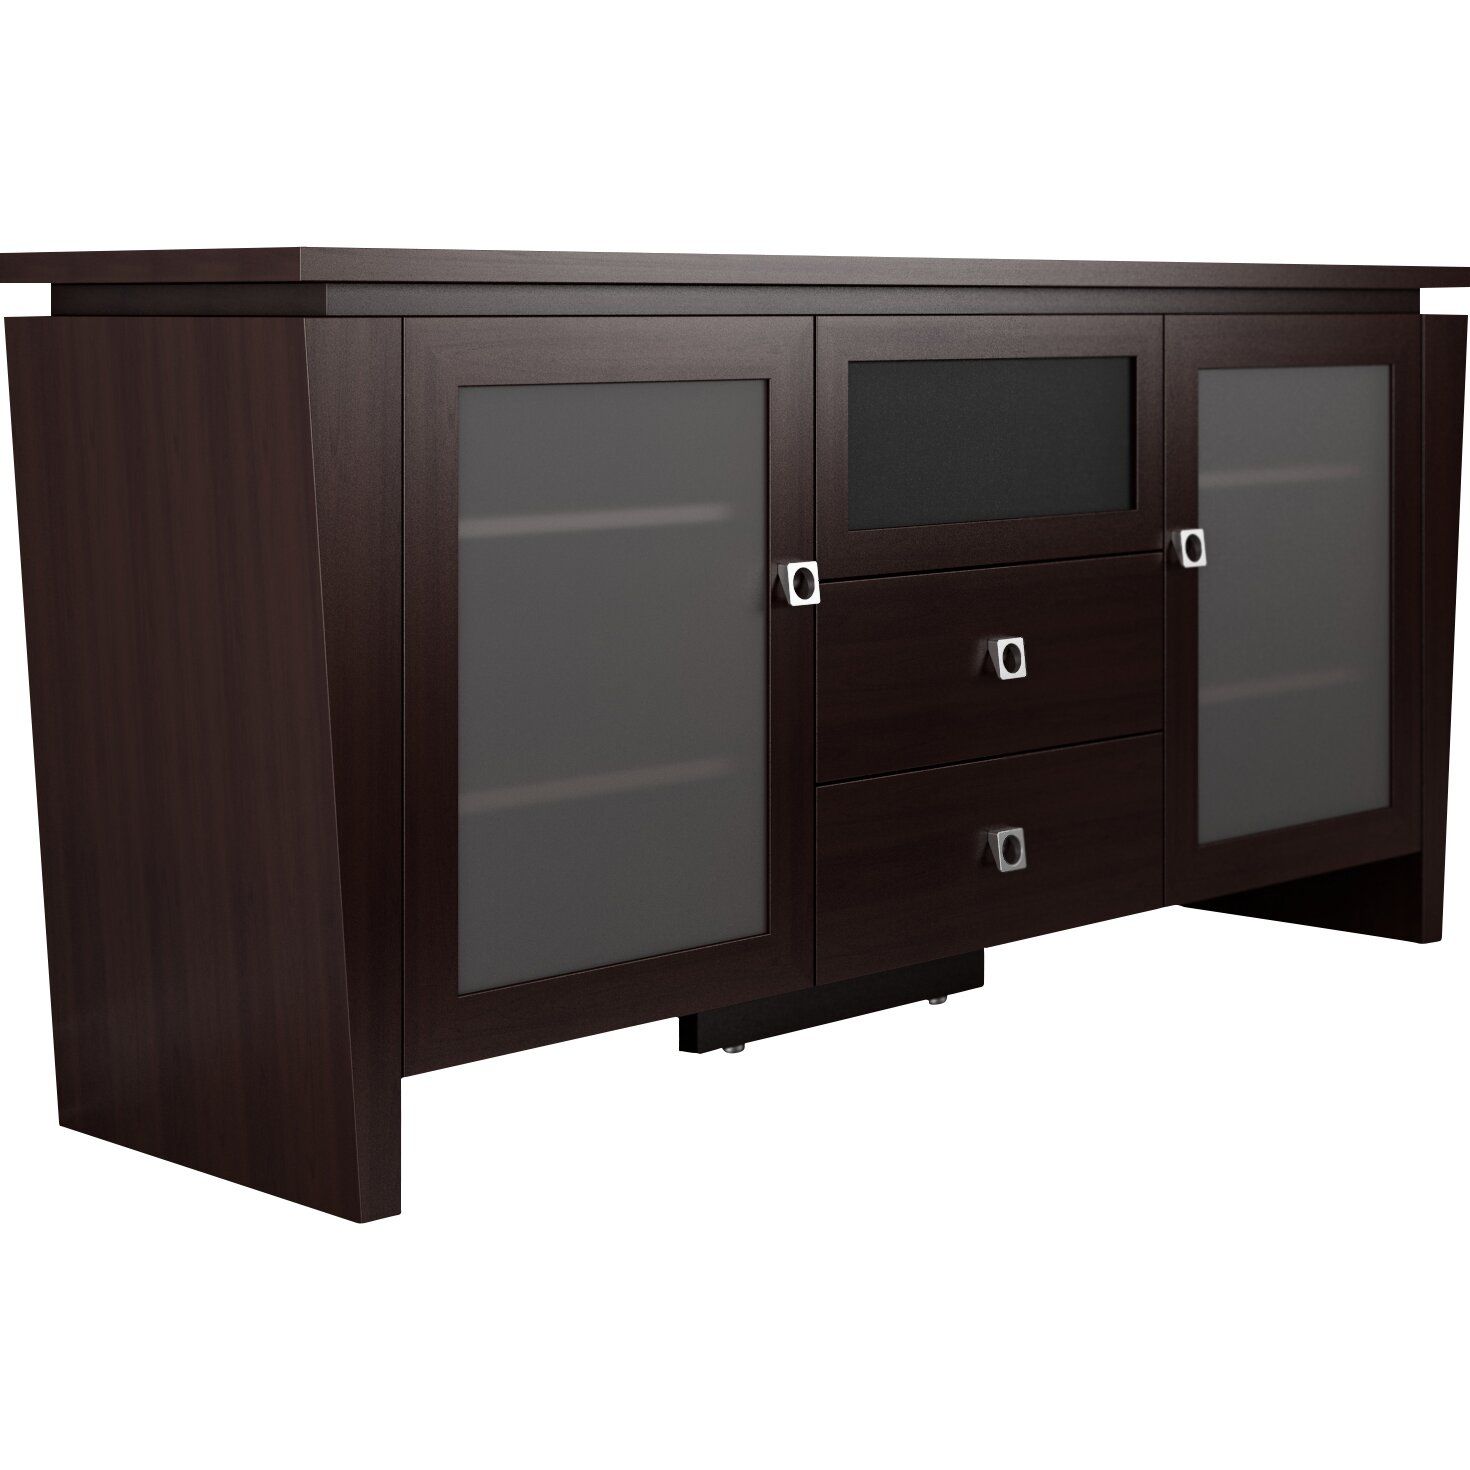 Furnitech Classic Modern Tv Stand & Reviews | Wayfair With Regard To Classic Tv Cabinets (View 13 of 15)